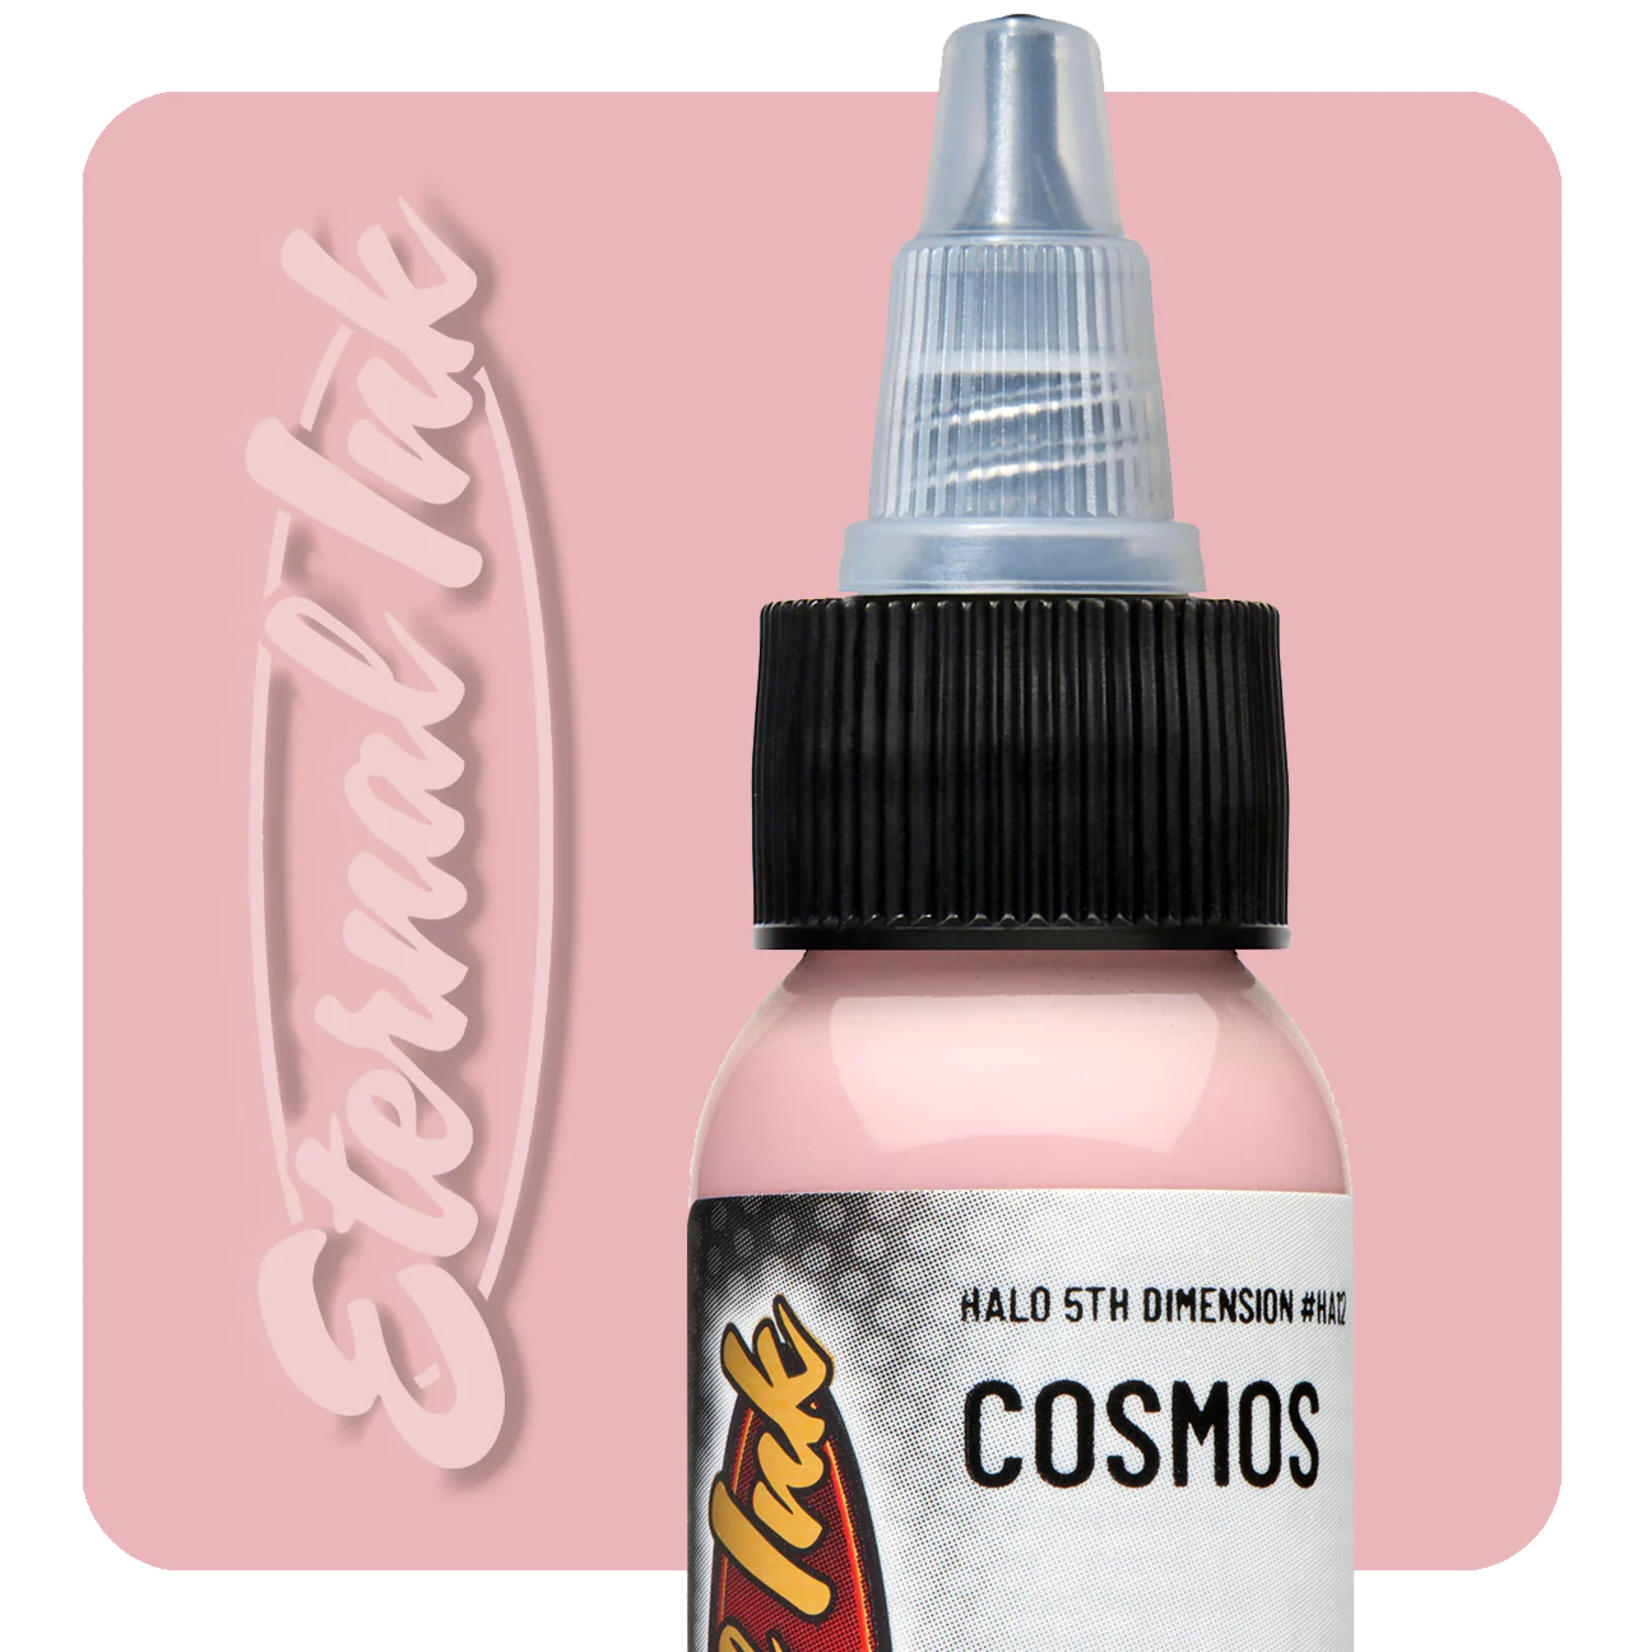 ETERNAL INK HALO FIFTH DIMENSION SIGNATURE SERIES COSMOS 1OZ